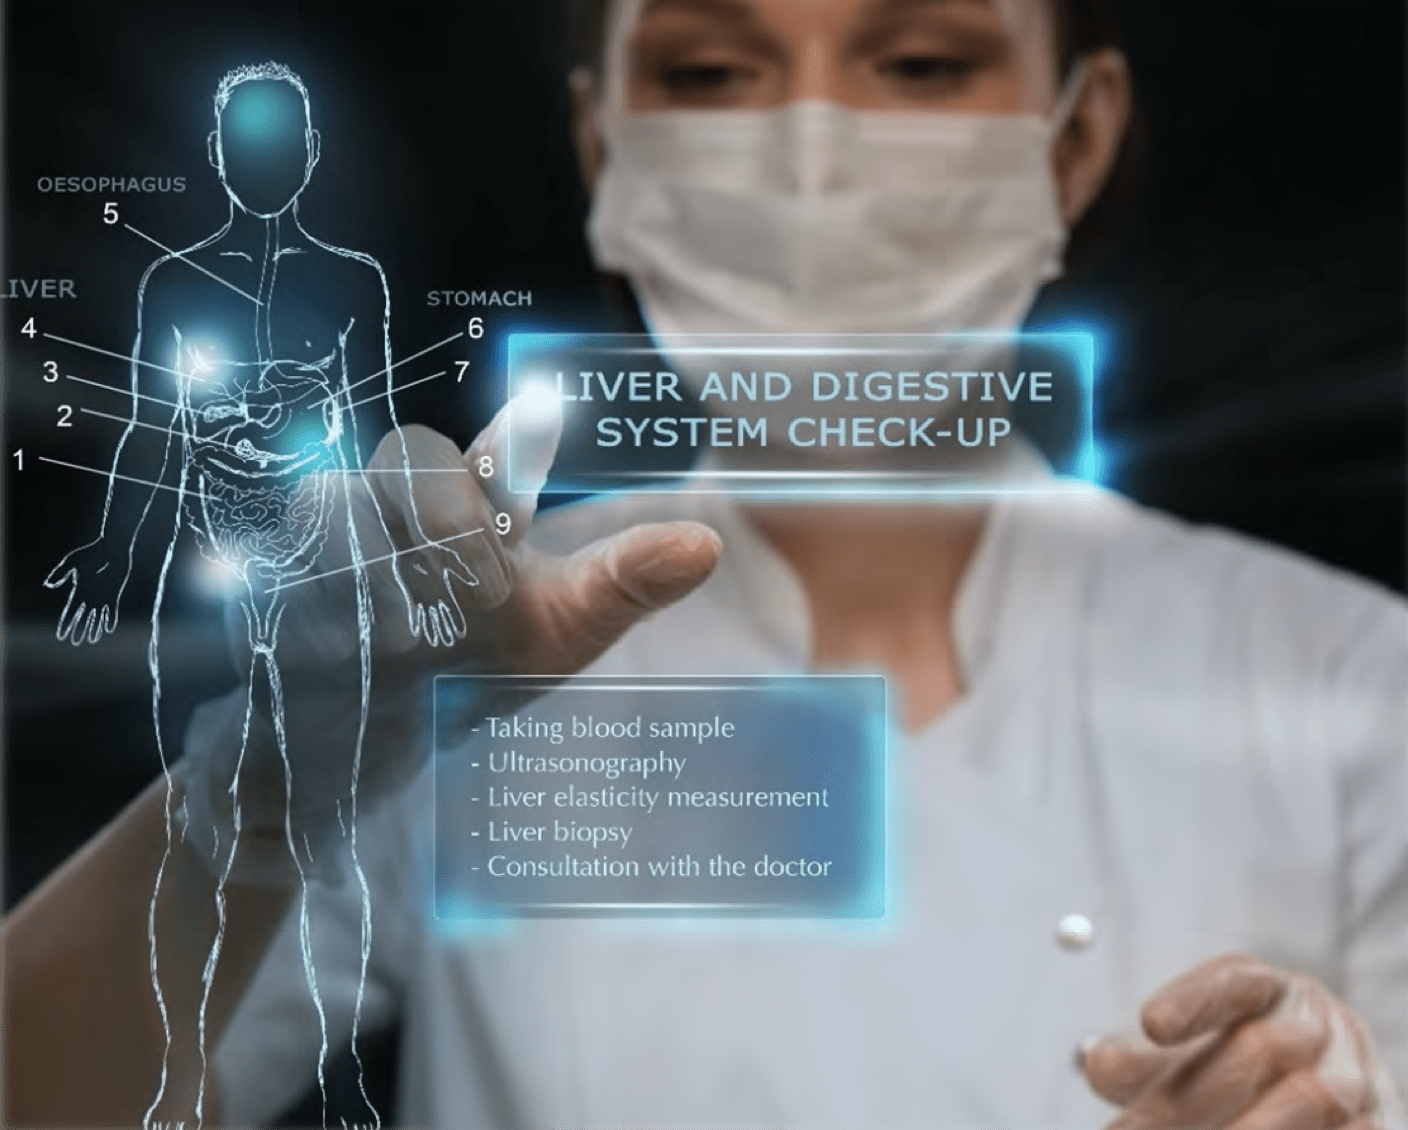 Image for Translating VR Research into Medical Impact